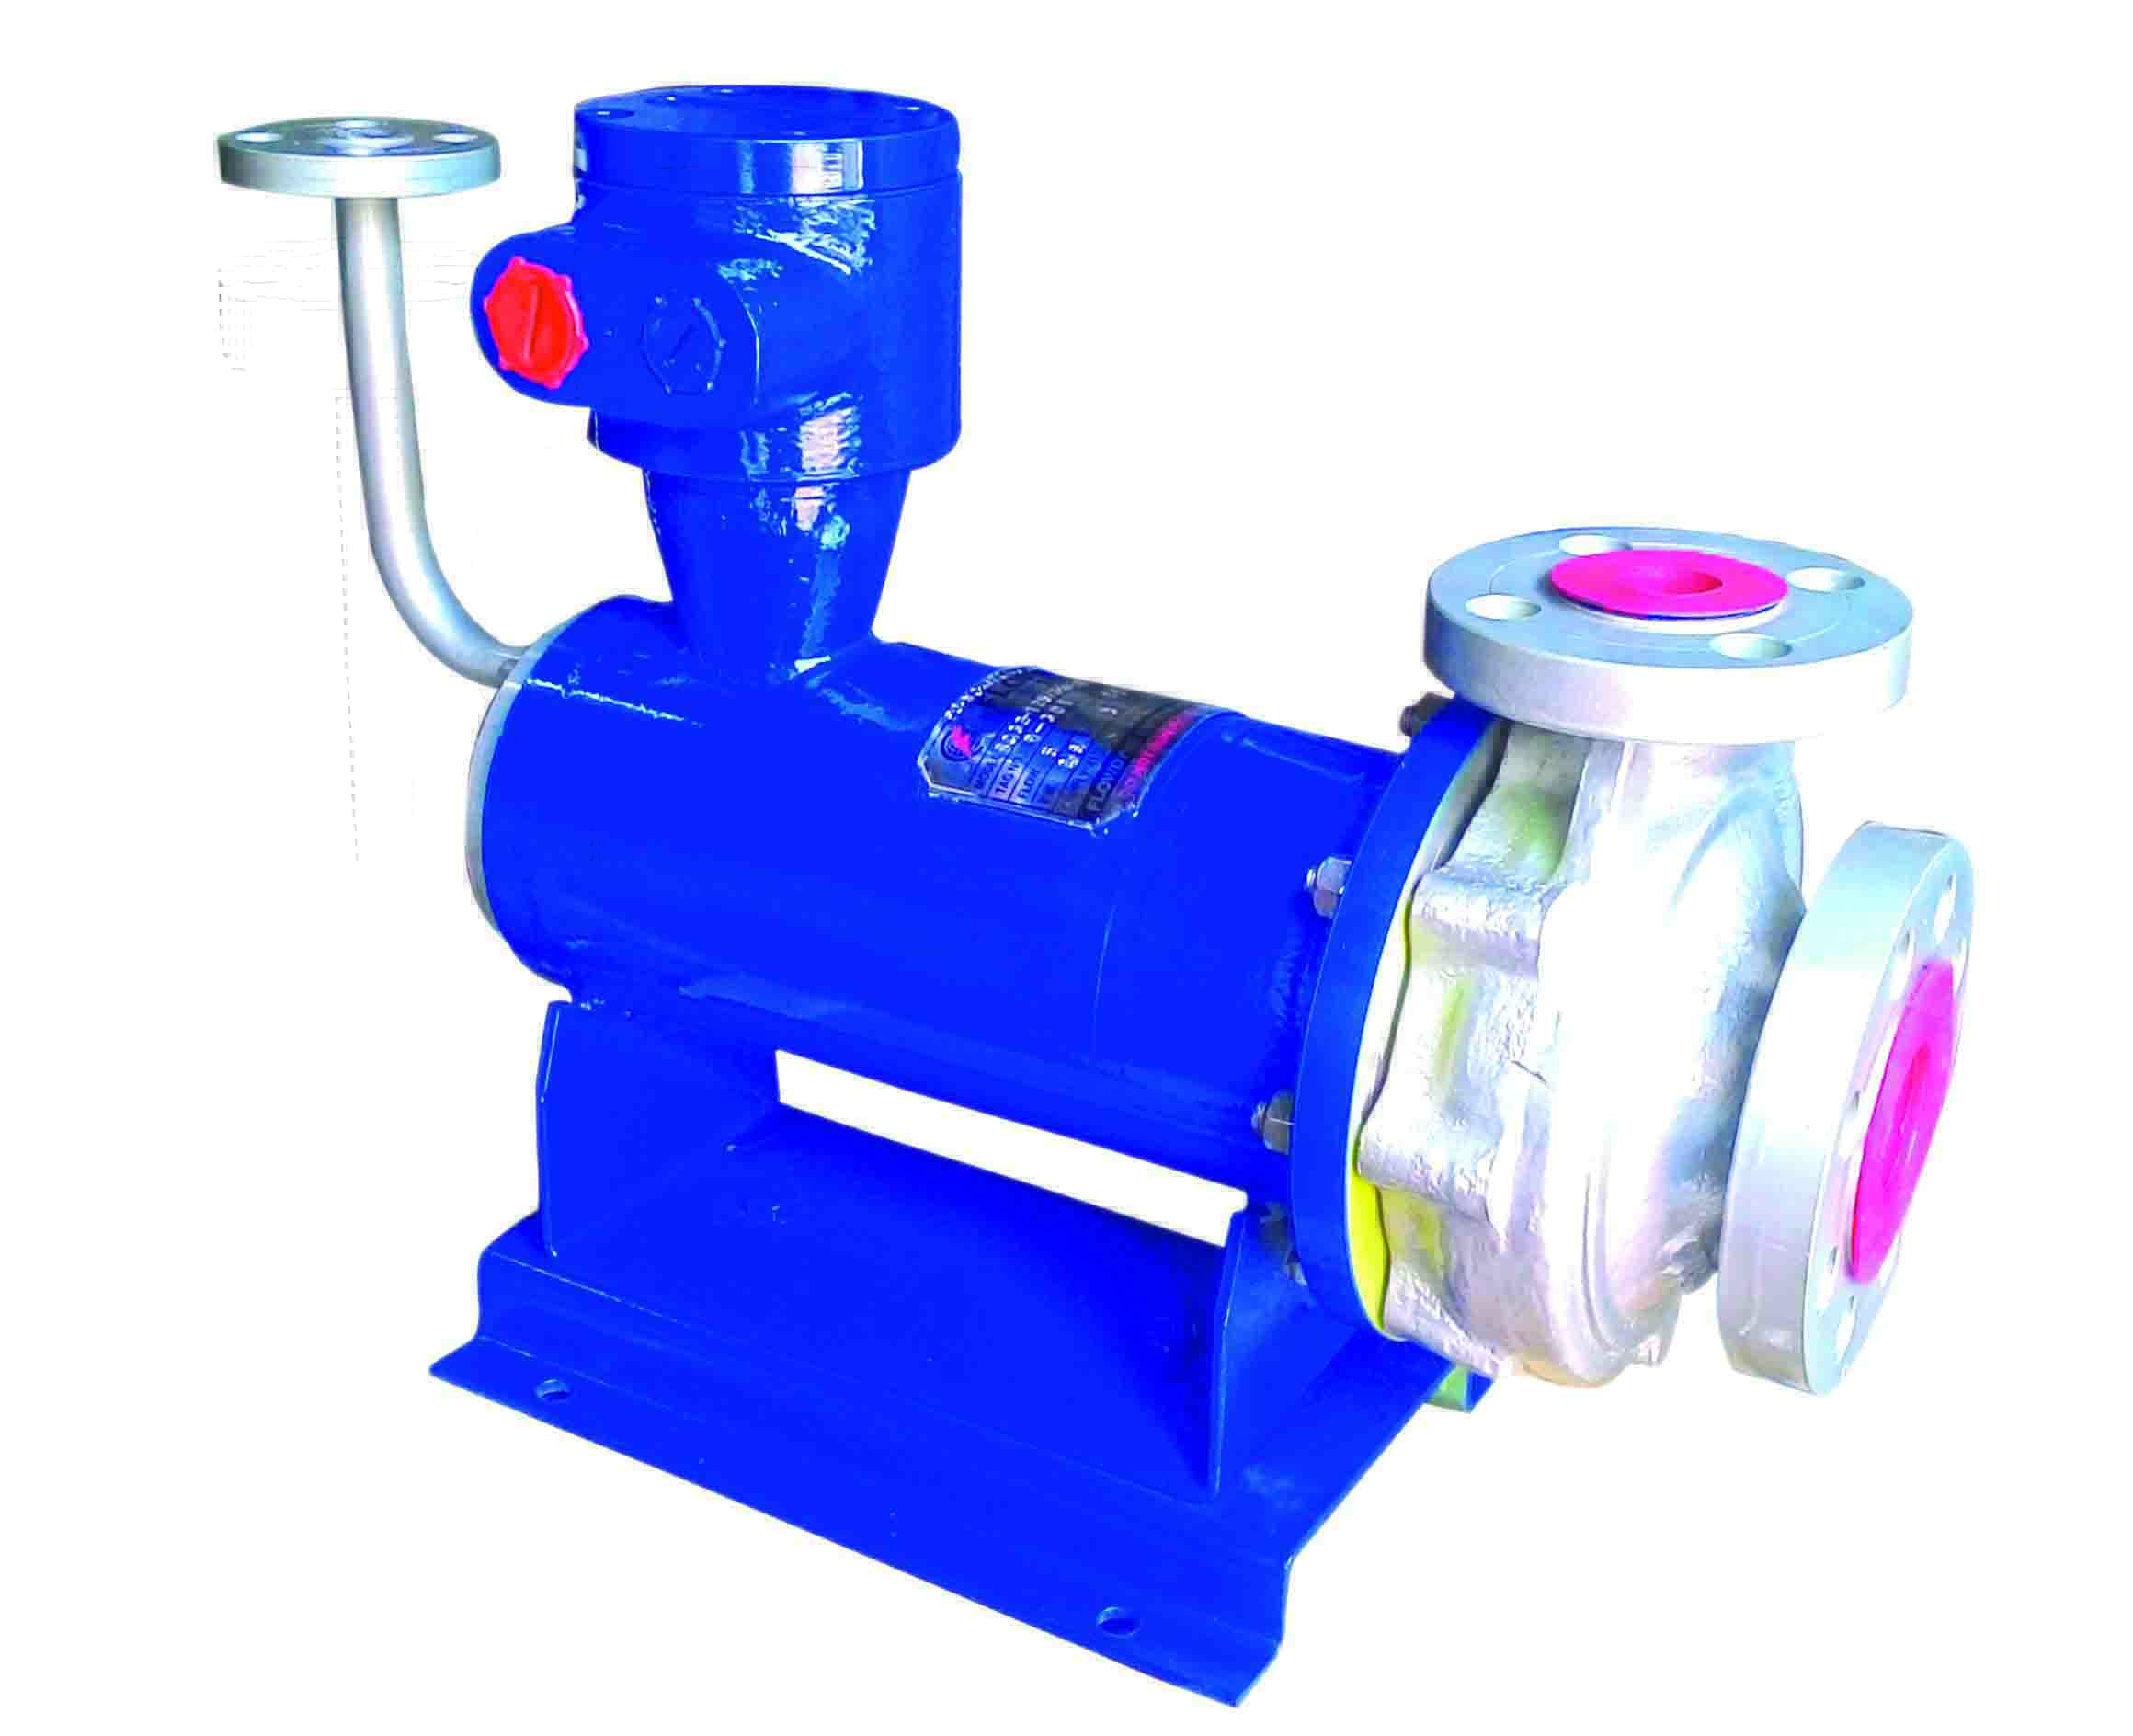 Canned Motor Pump: NIKKISO NON-SEAL Centrifugal pumps